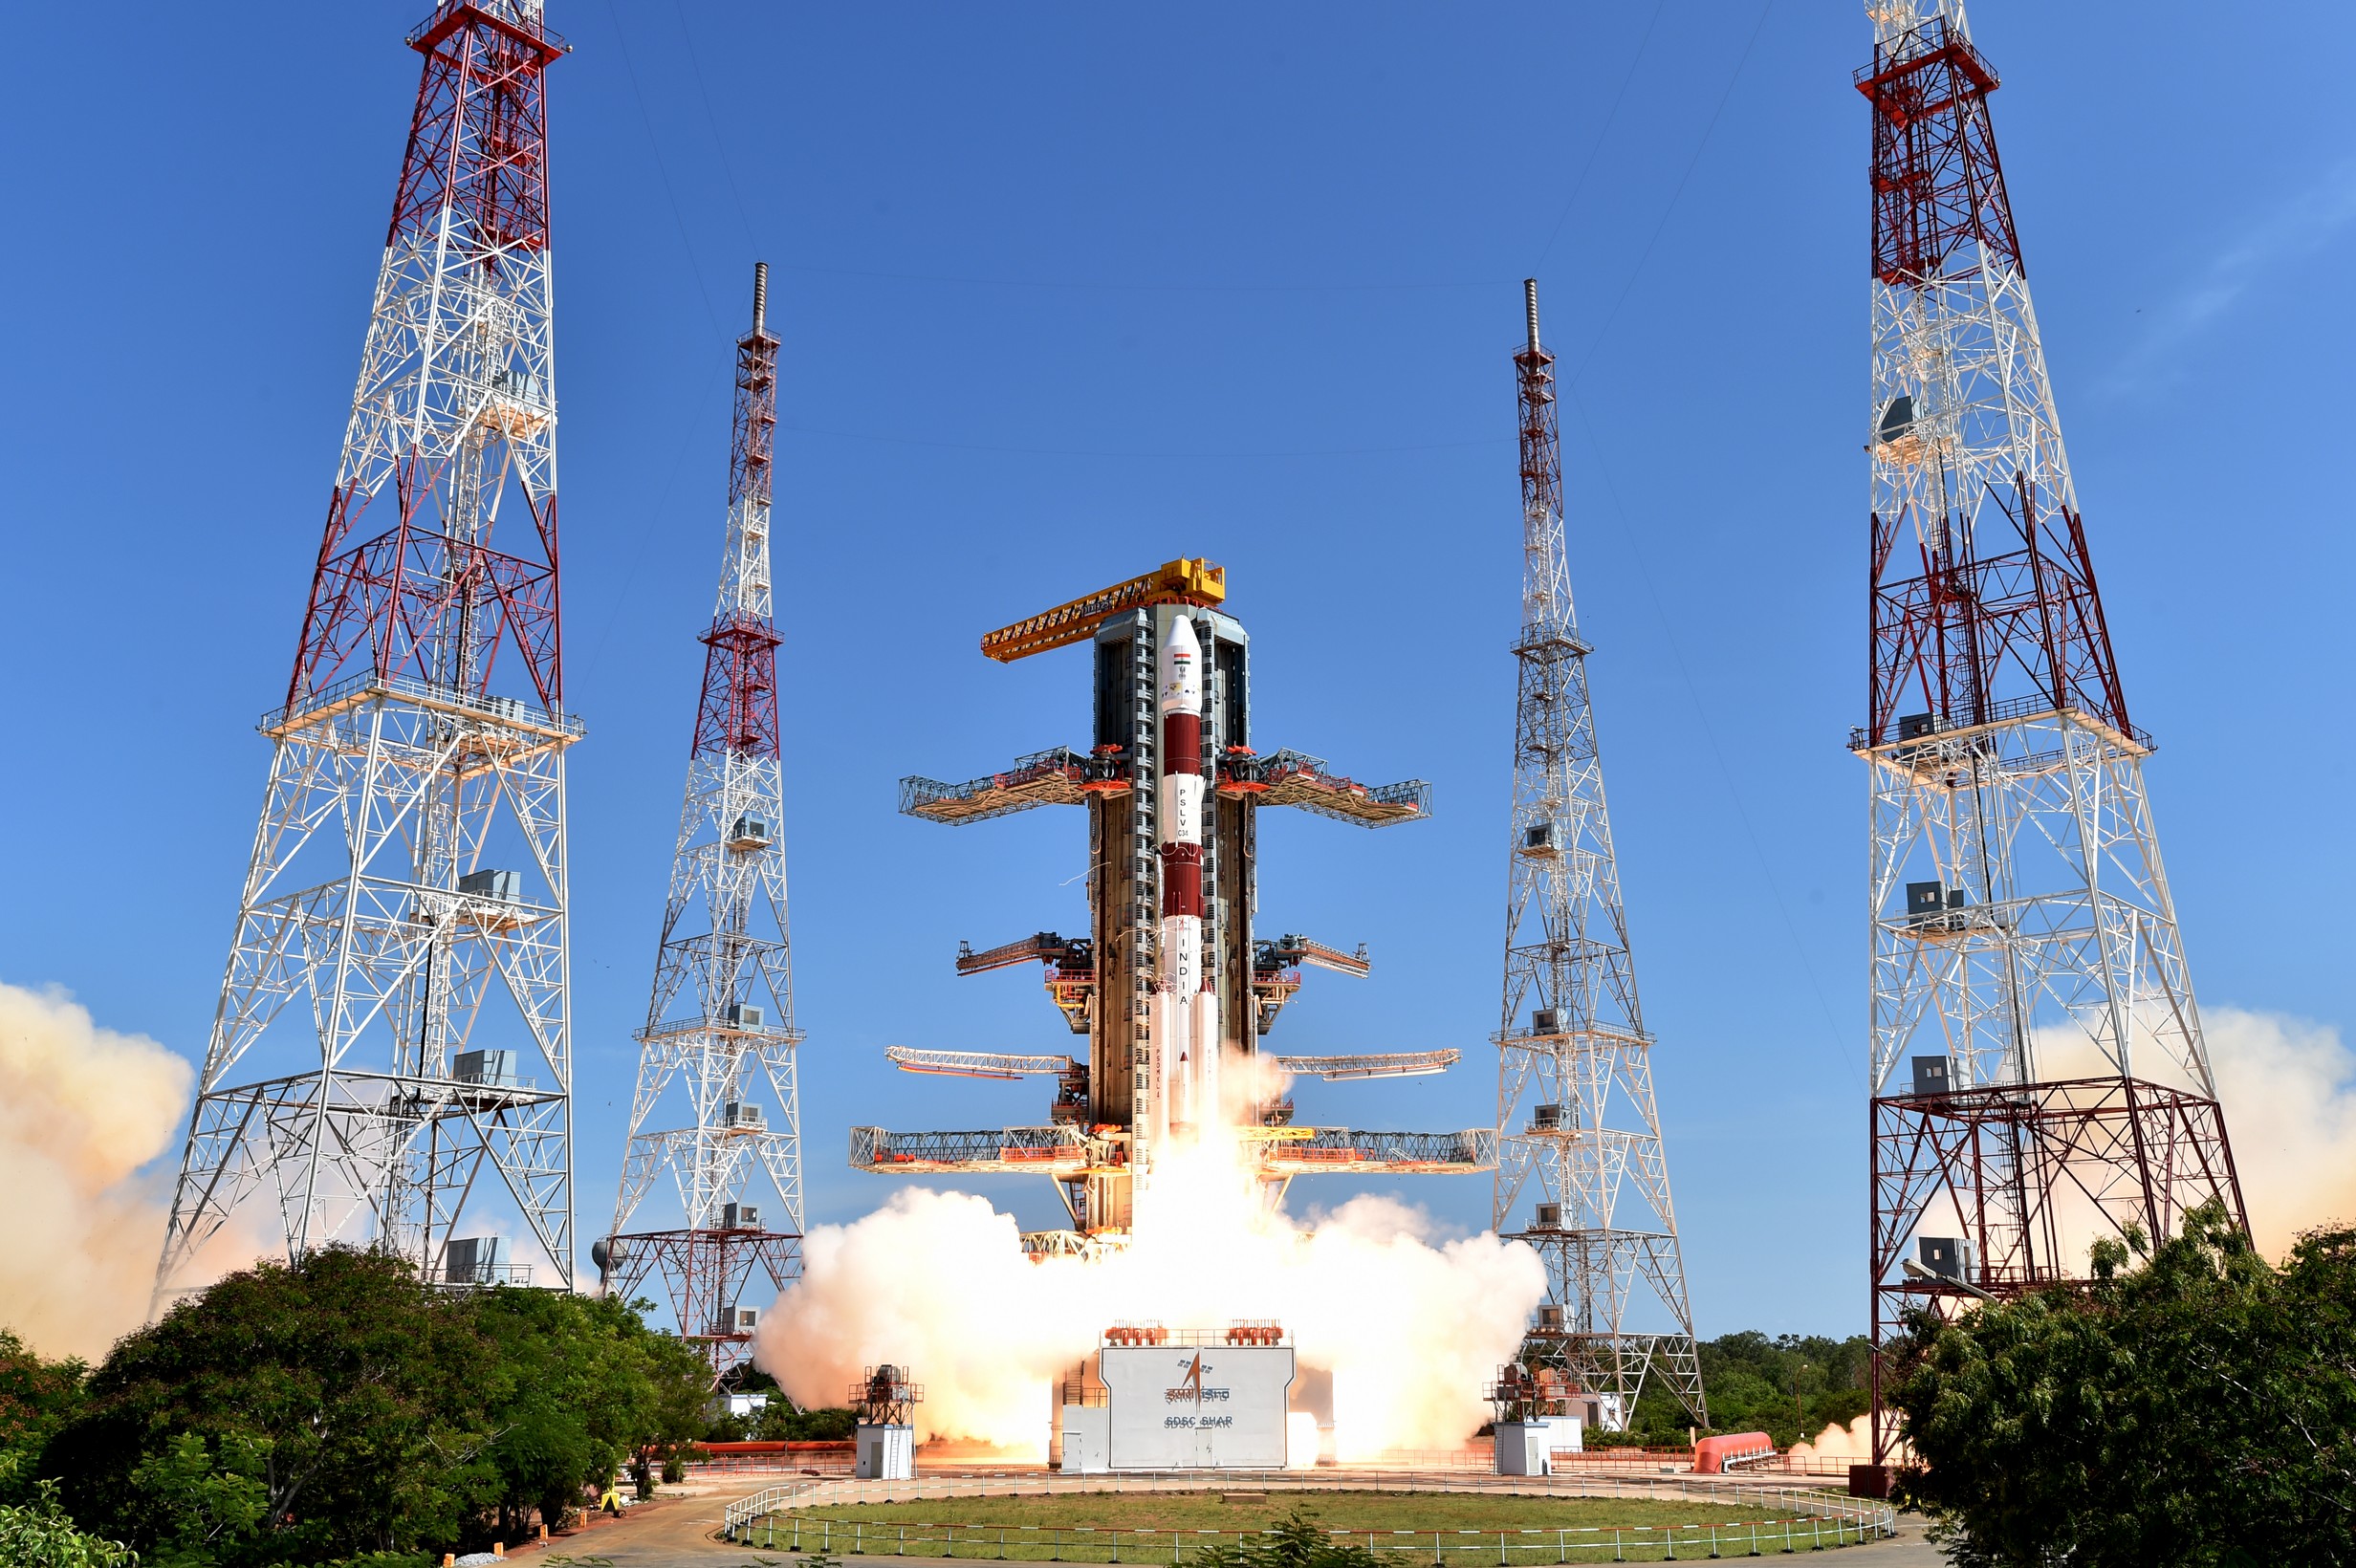 The total weight of all the 20 satellites carried on PSLV-C34 was 1288 kilograms and this is the 35th consecutive successful mission of PSLV and the 14th in its XL configuration.